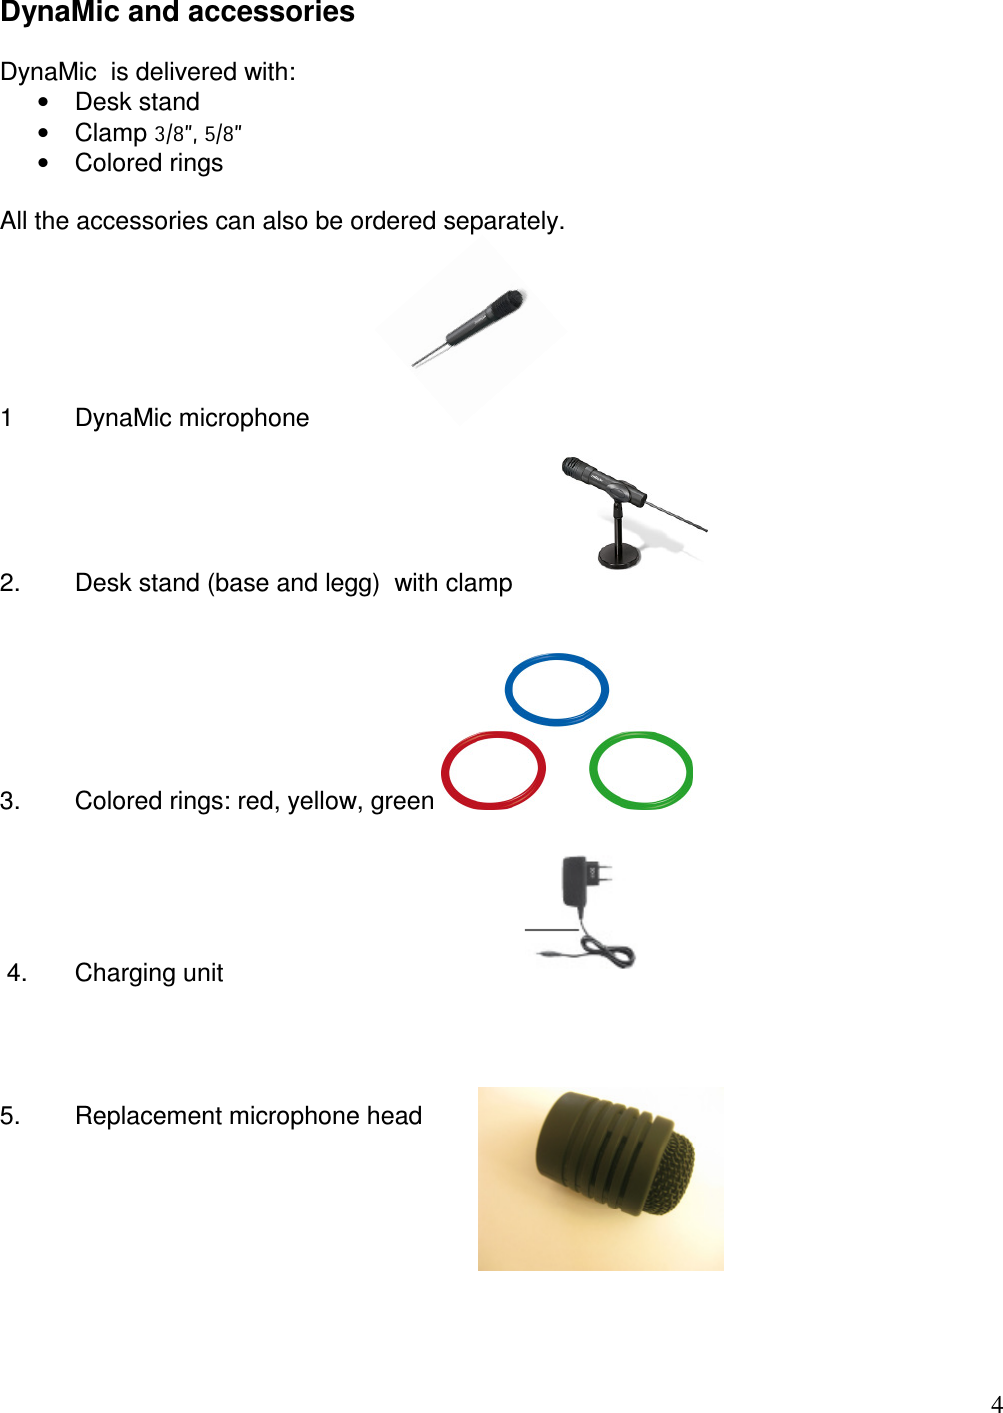   4 DynaMic and accessories  DynaMic  is delivered with: •  Desk stand  •  Clamp 3/8”, 5/8” •  Colored rings   All the accessories can also be ordered separately.  1   DynaMic microphone    2.   Desk stand (base and legg)  with clamp              3.  Colored rings: red, yellow, green     4.   Charging unit              5.   Replacement microphone head        